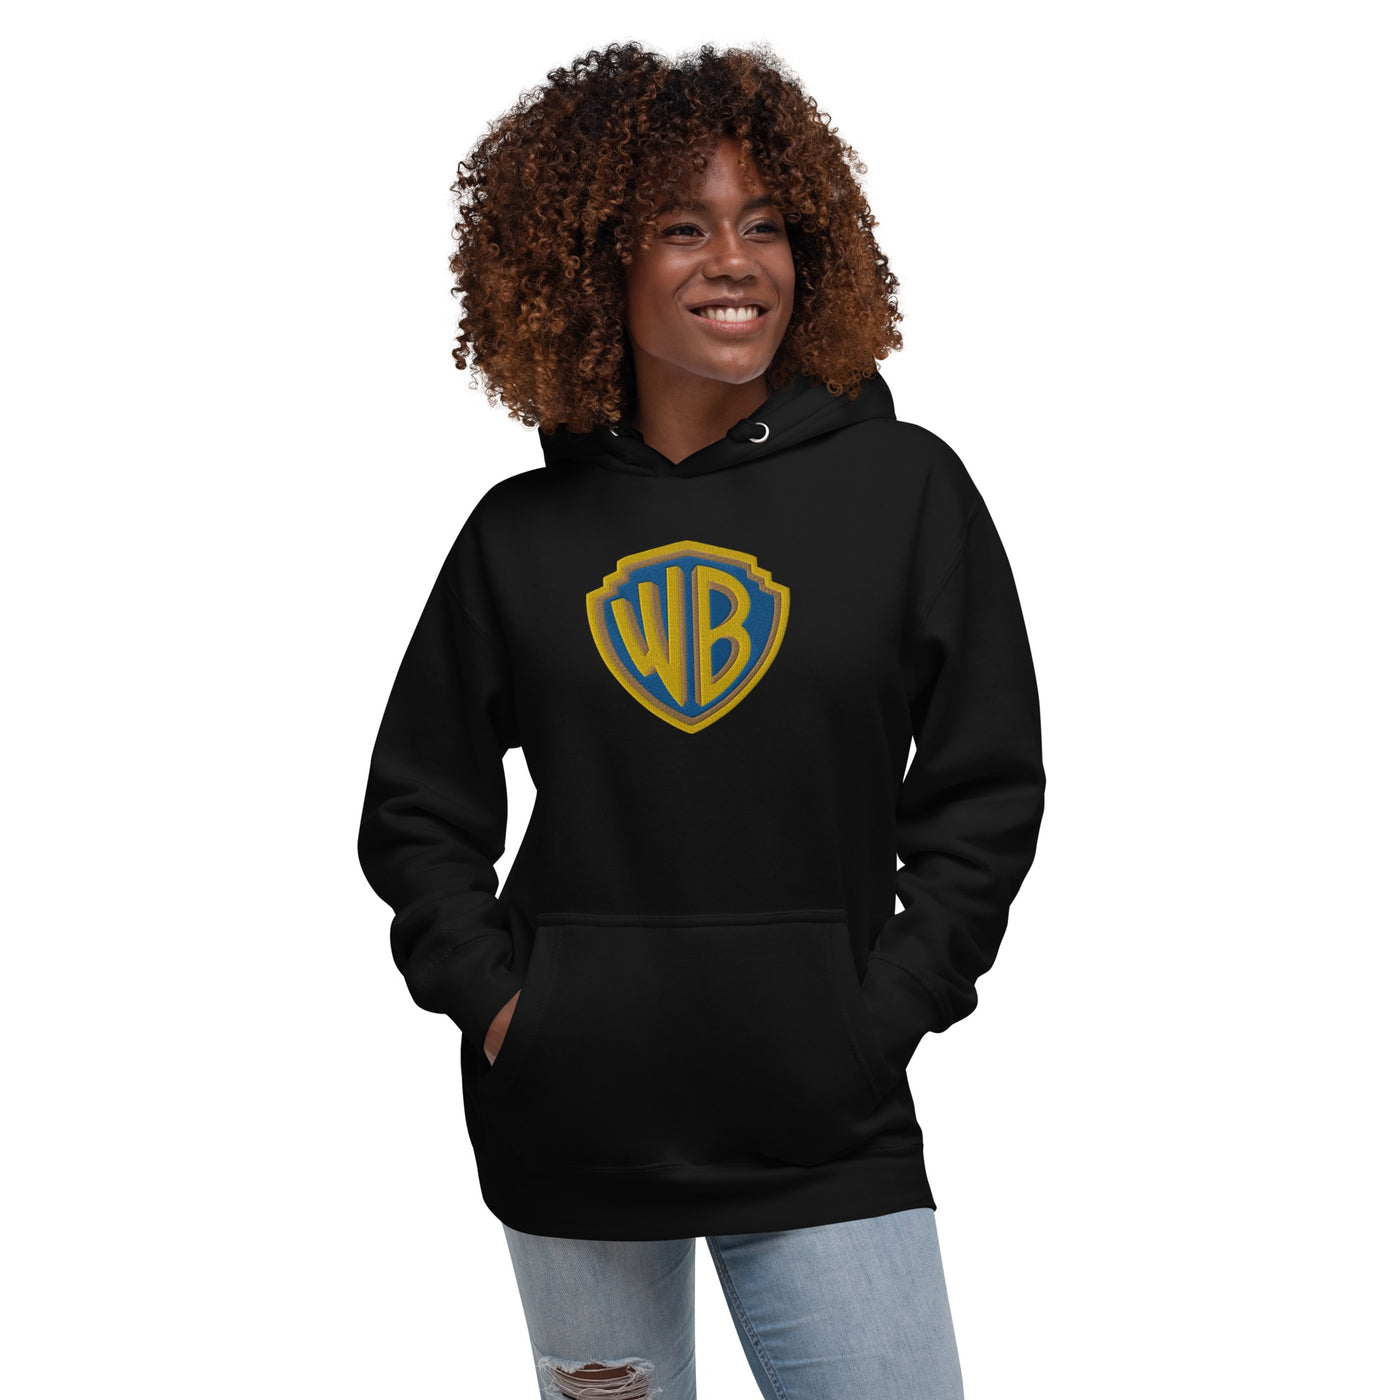 WB Shield Embroidered Adult Hoodie